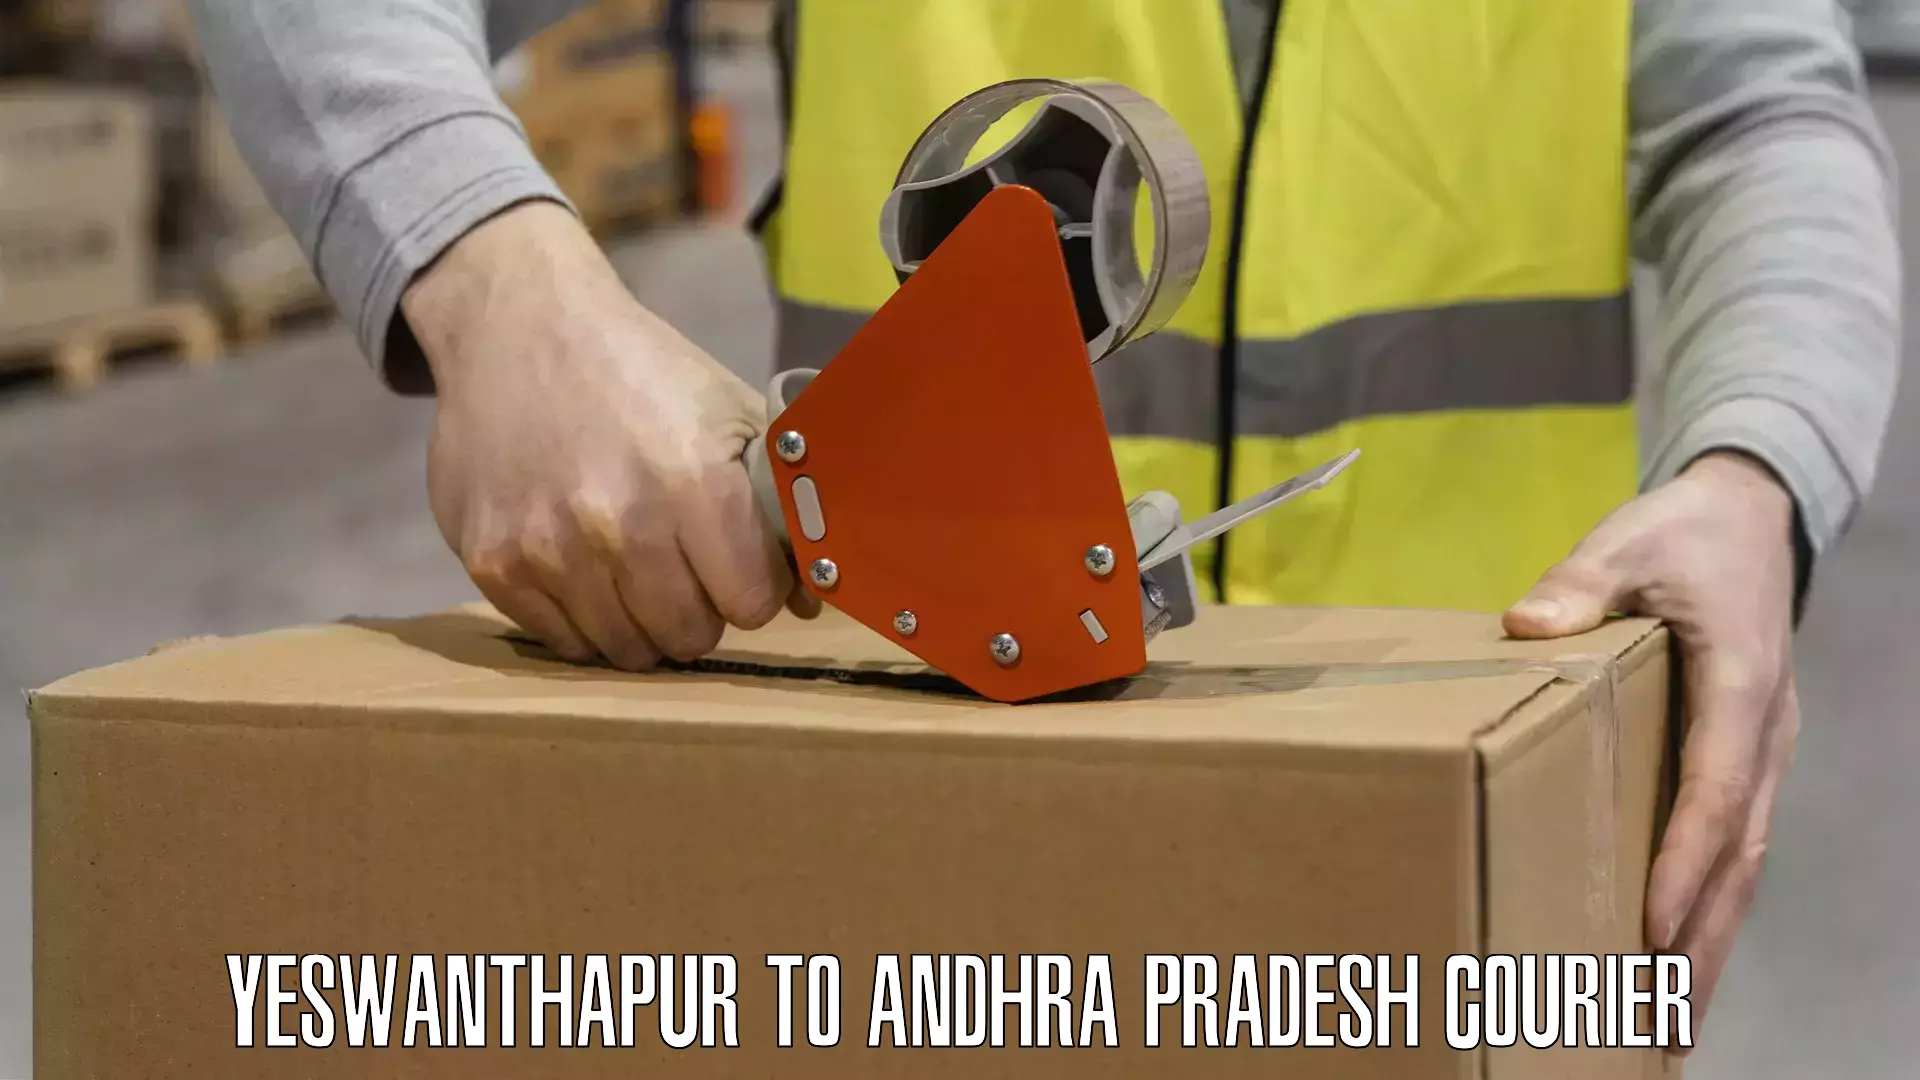 Courier service comparison Yeswanthapur to Andhra Pradesh